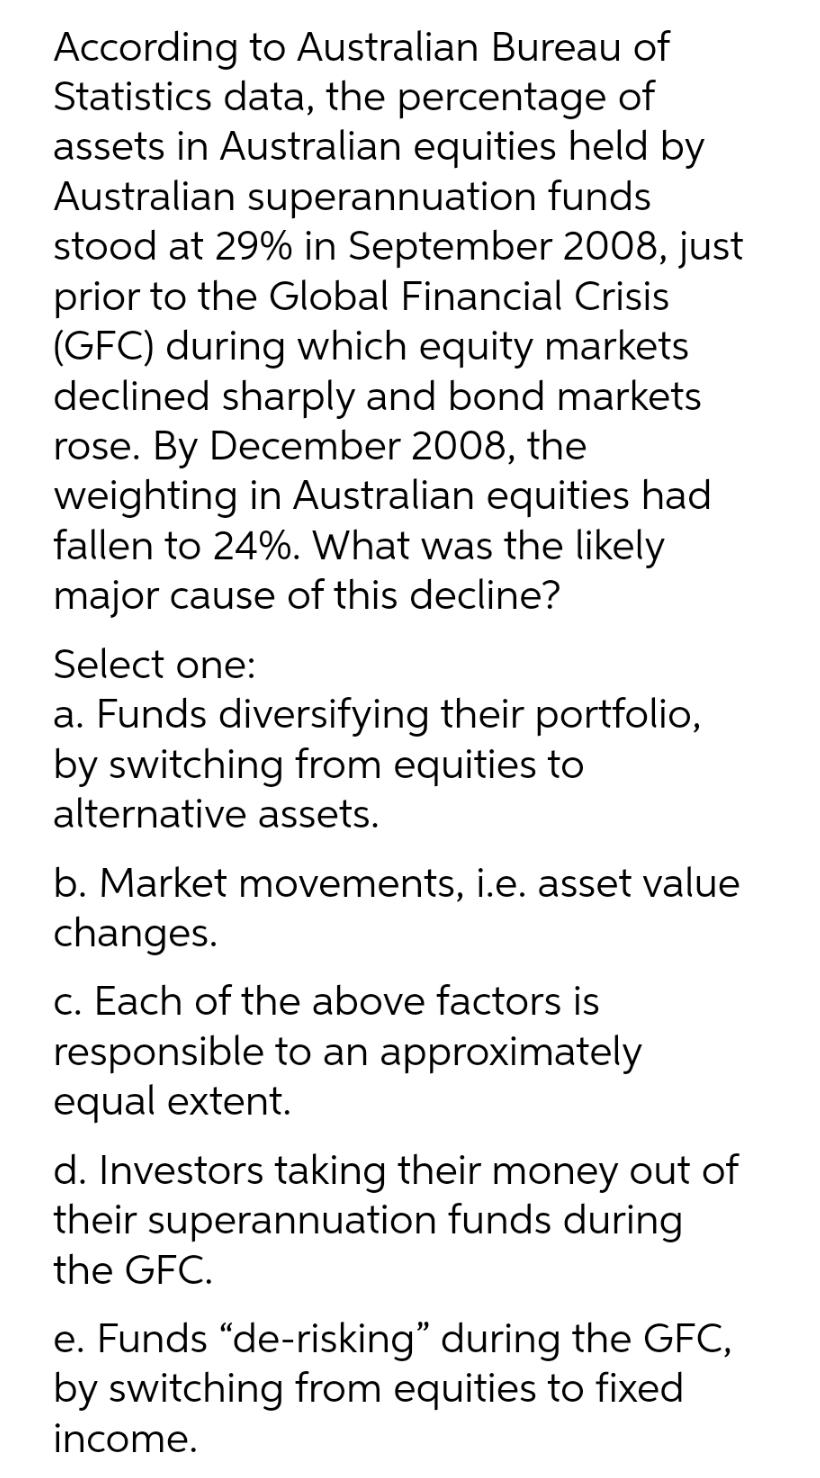 According to Australian Bureau of Statistics data, the percentage of assets in Australian equities held by